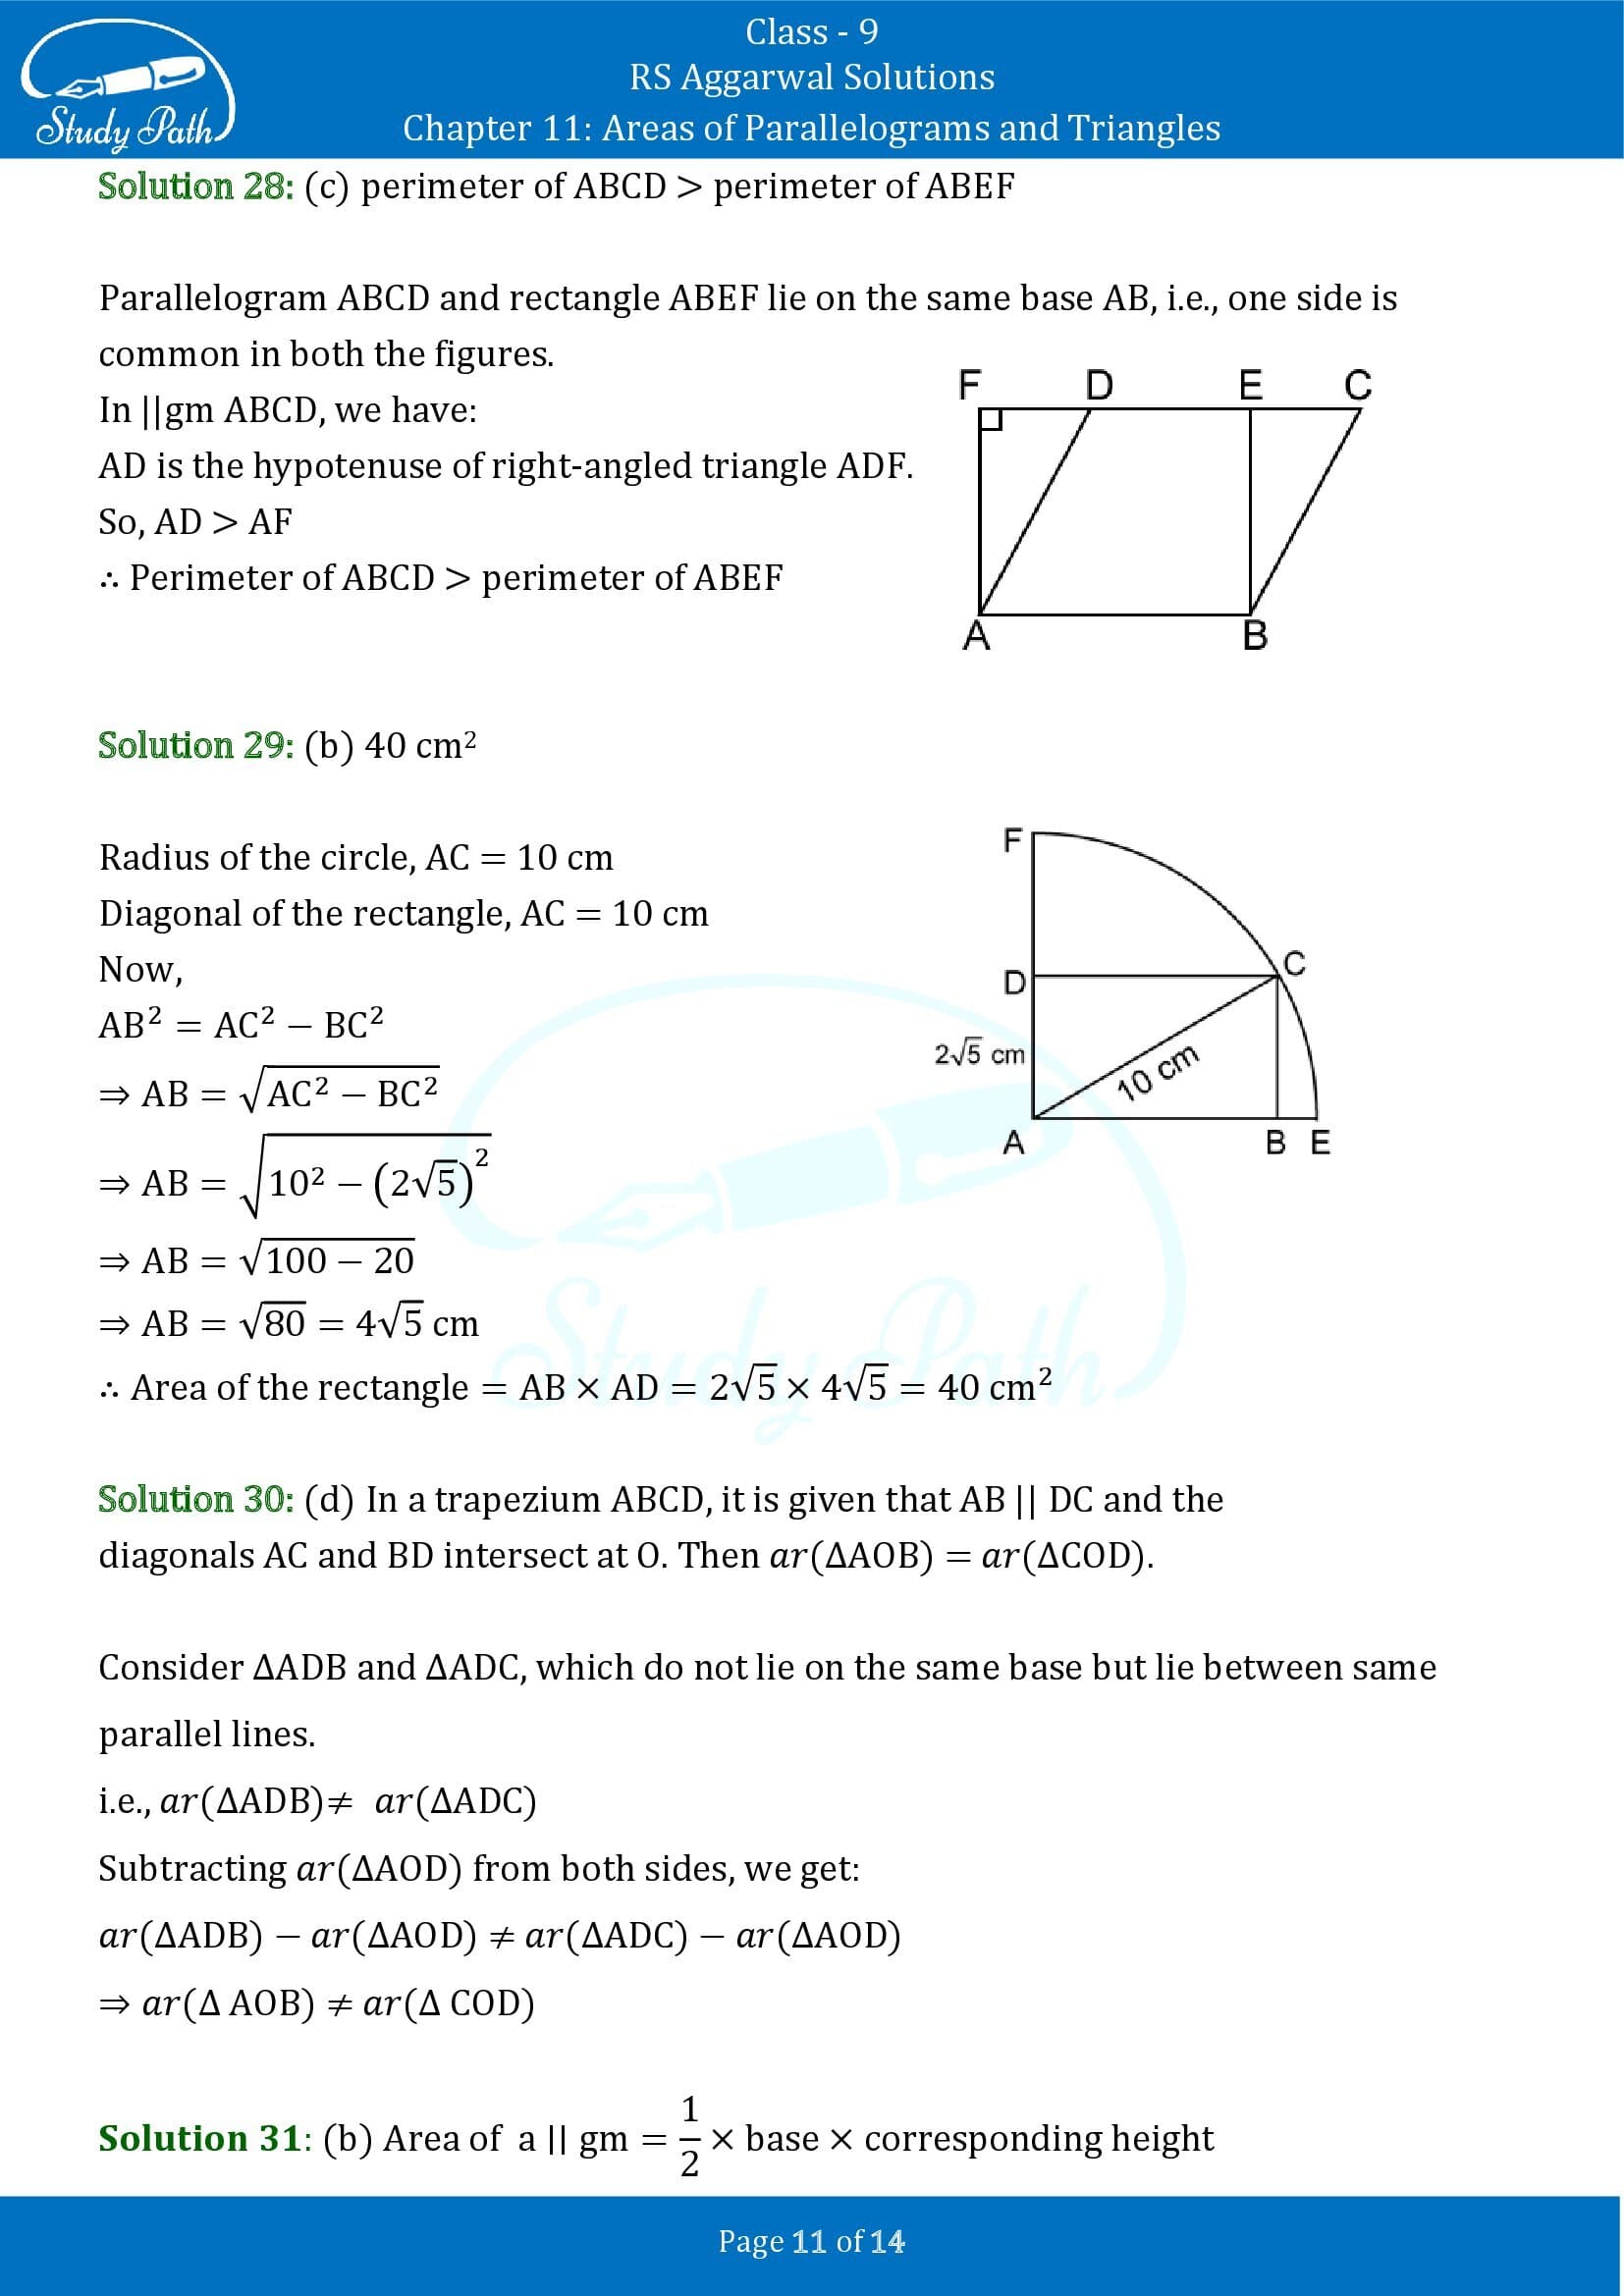 RS Aggarwal Solutions Class 9 Chapter 11 Areas of Parallelograms and Triangles Multiple Choice Questions MCQs 00011